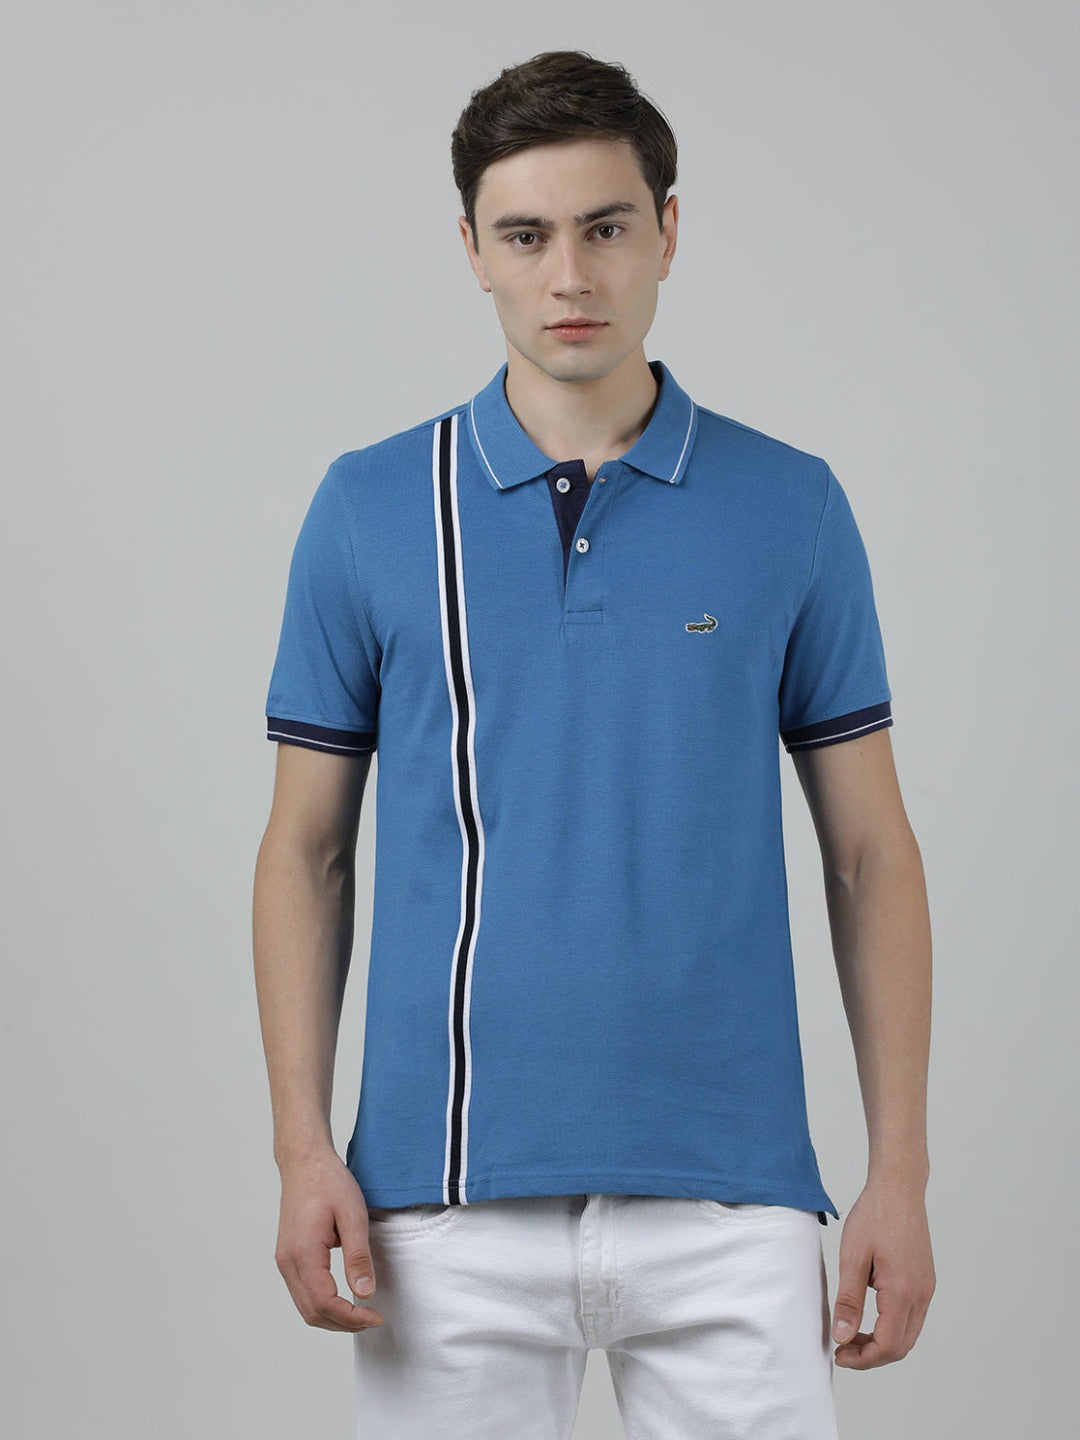 Casual Blue Solid Polo T-Shirt Half Sleeve Slim Fit with Collar for Men